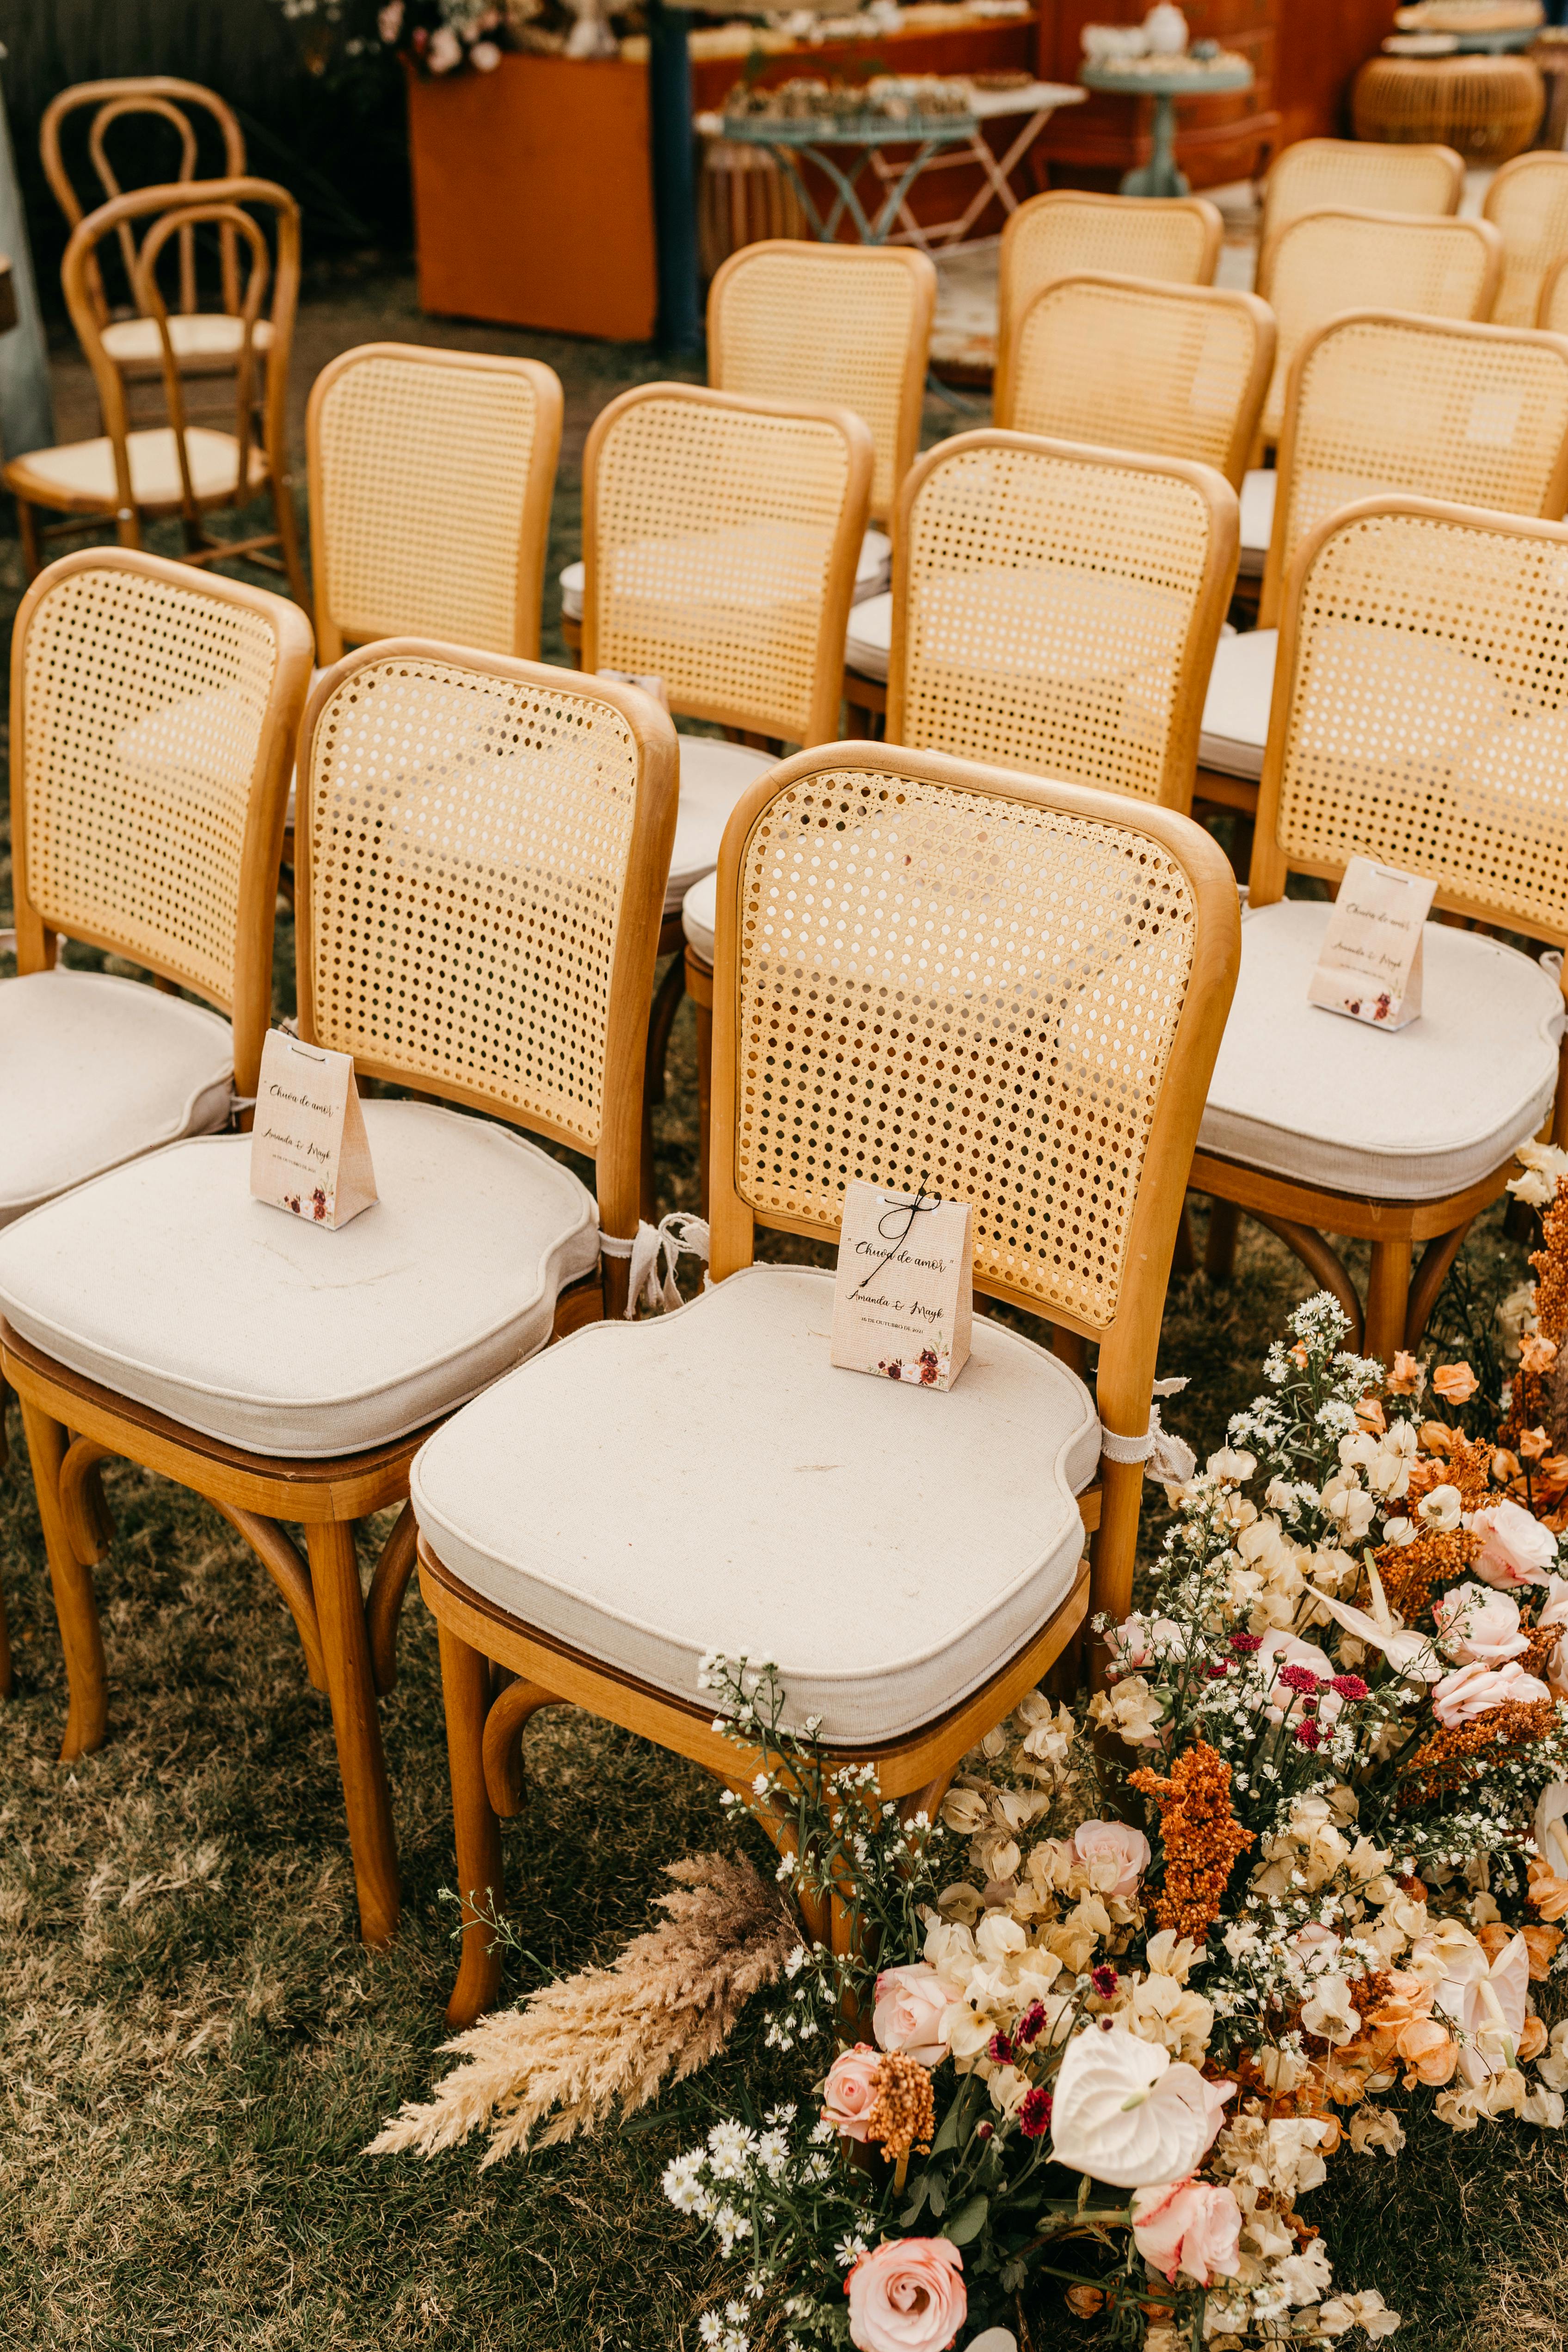 Chairs at a wedding | Source: Pexels